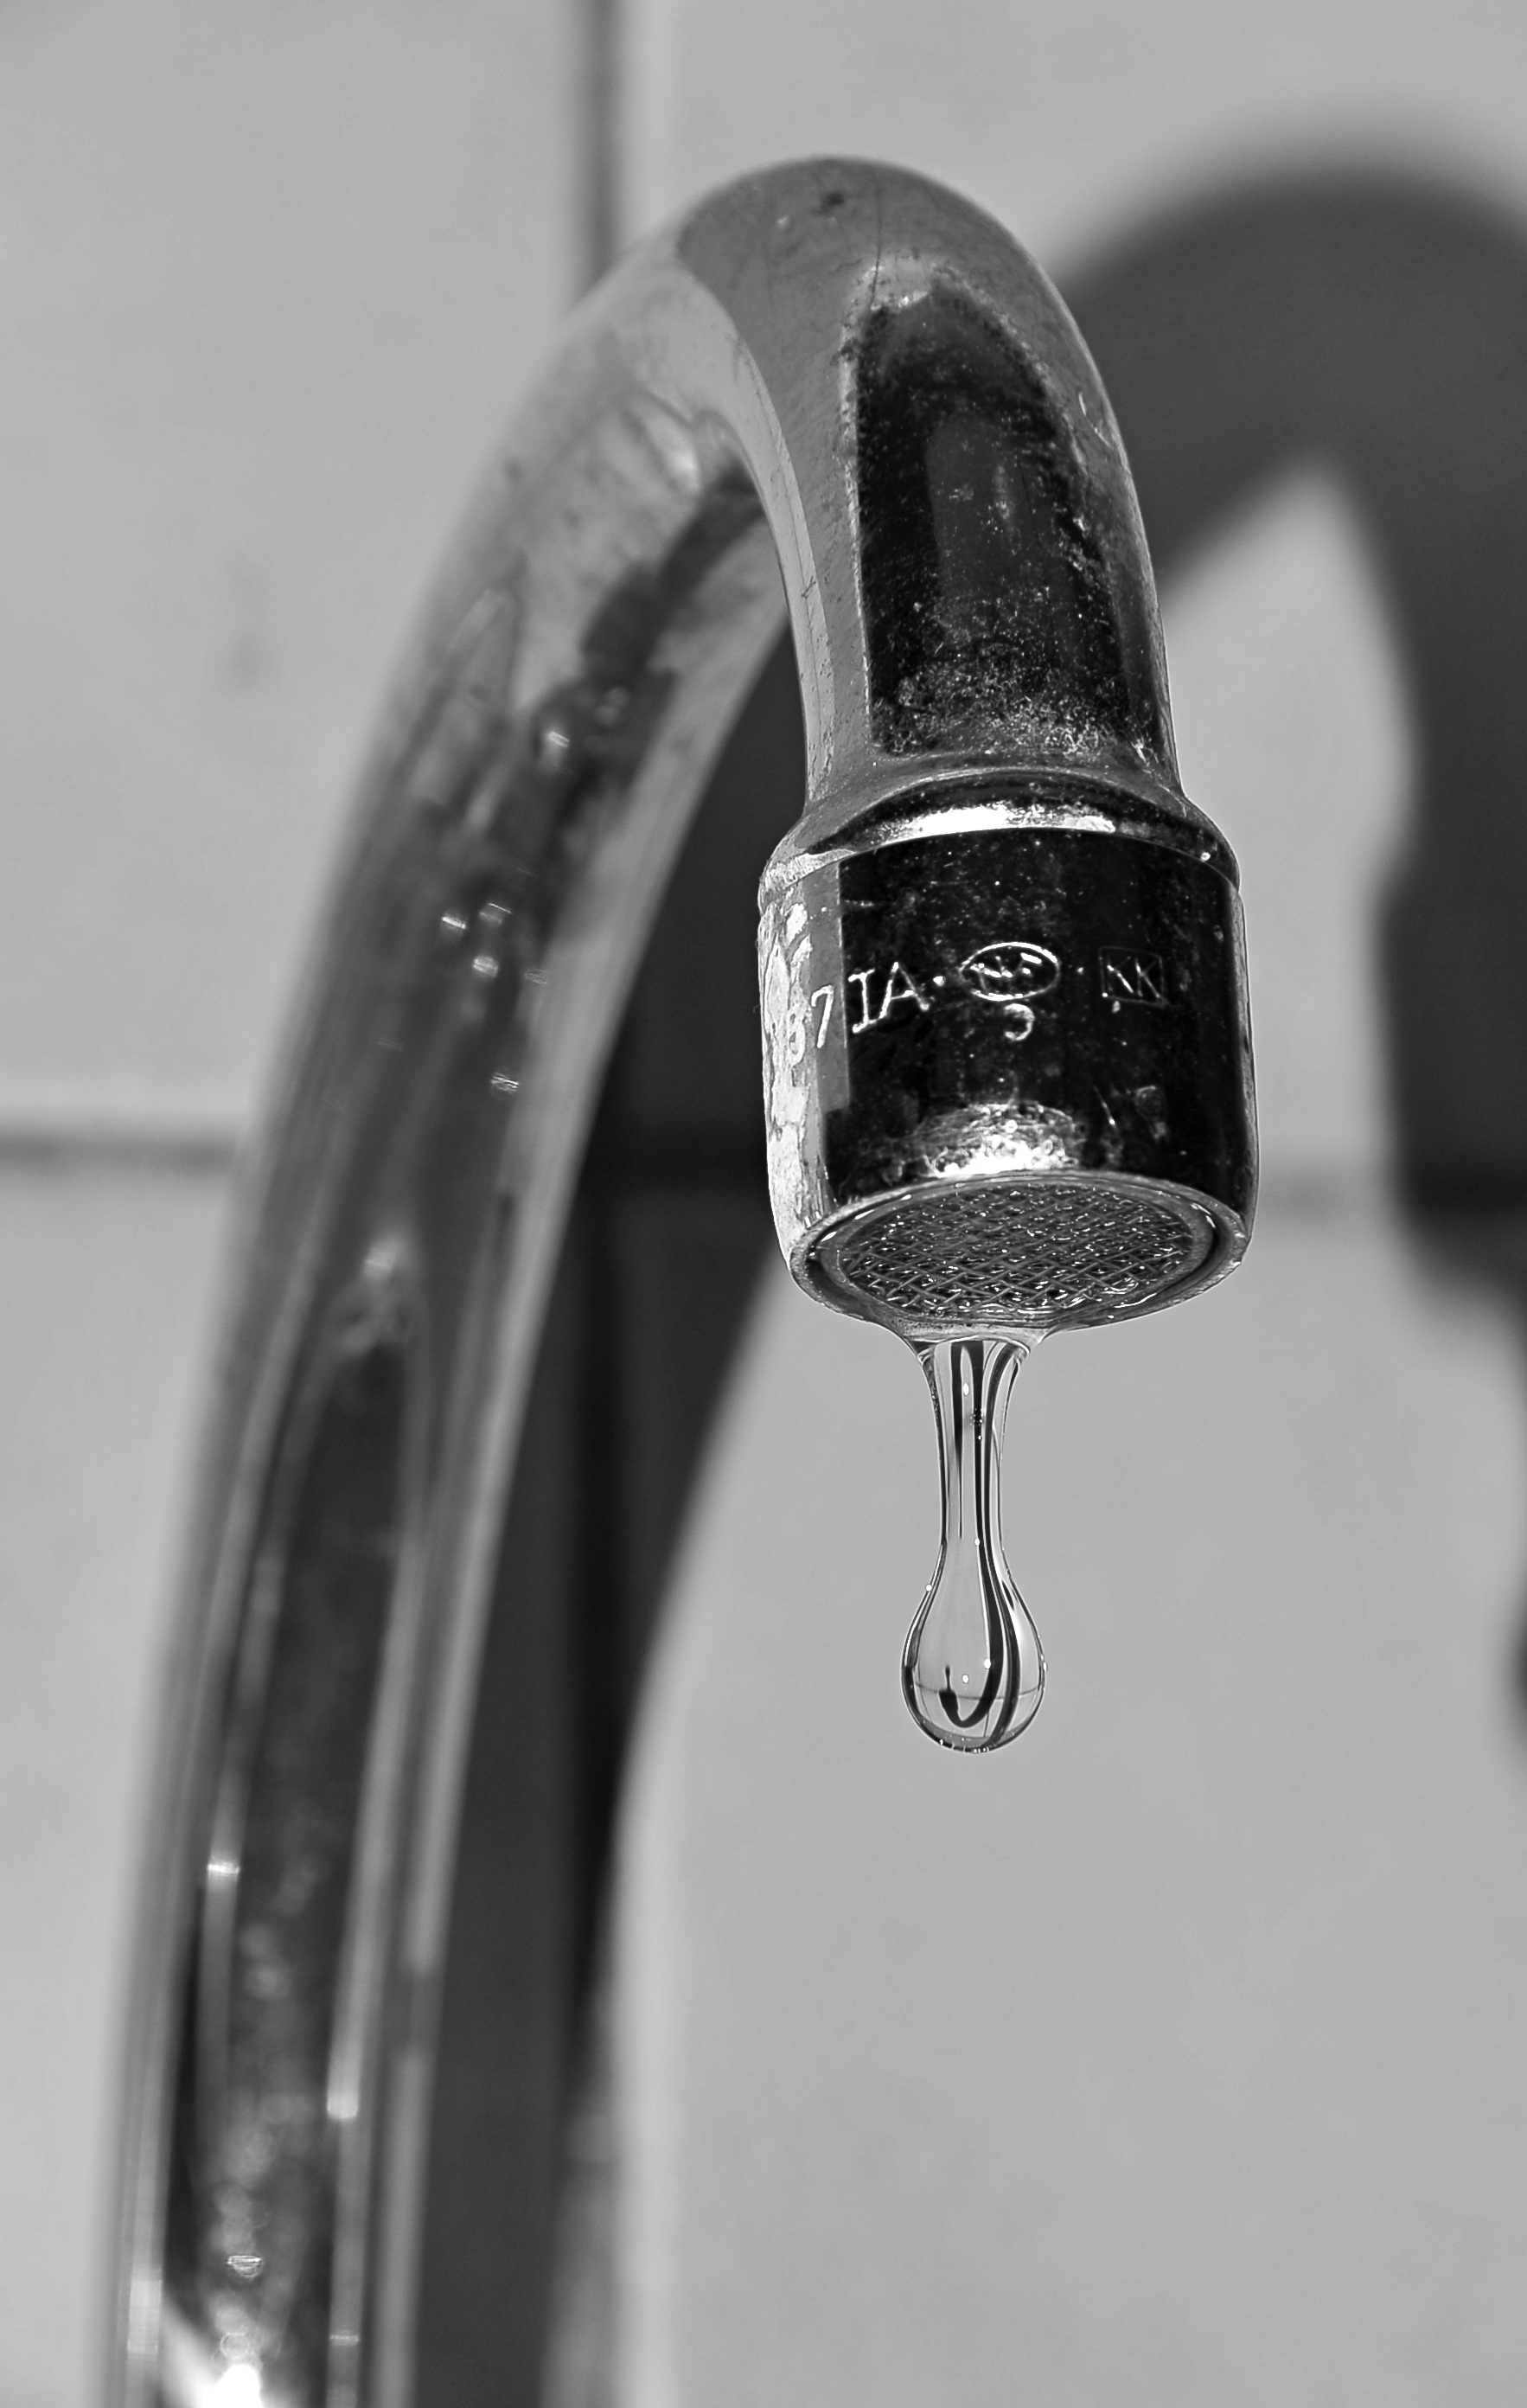 file-faucet-jpg-wikimedia-commons